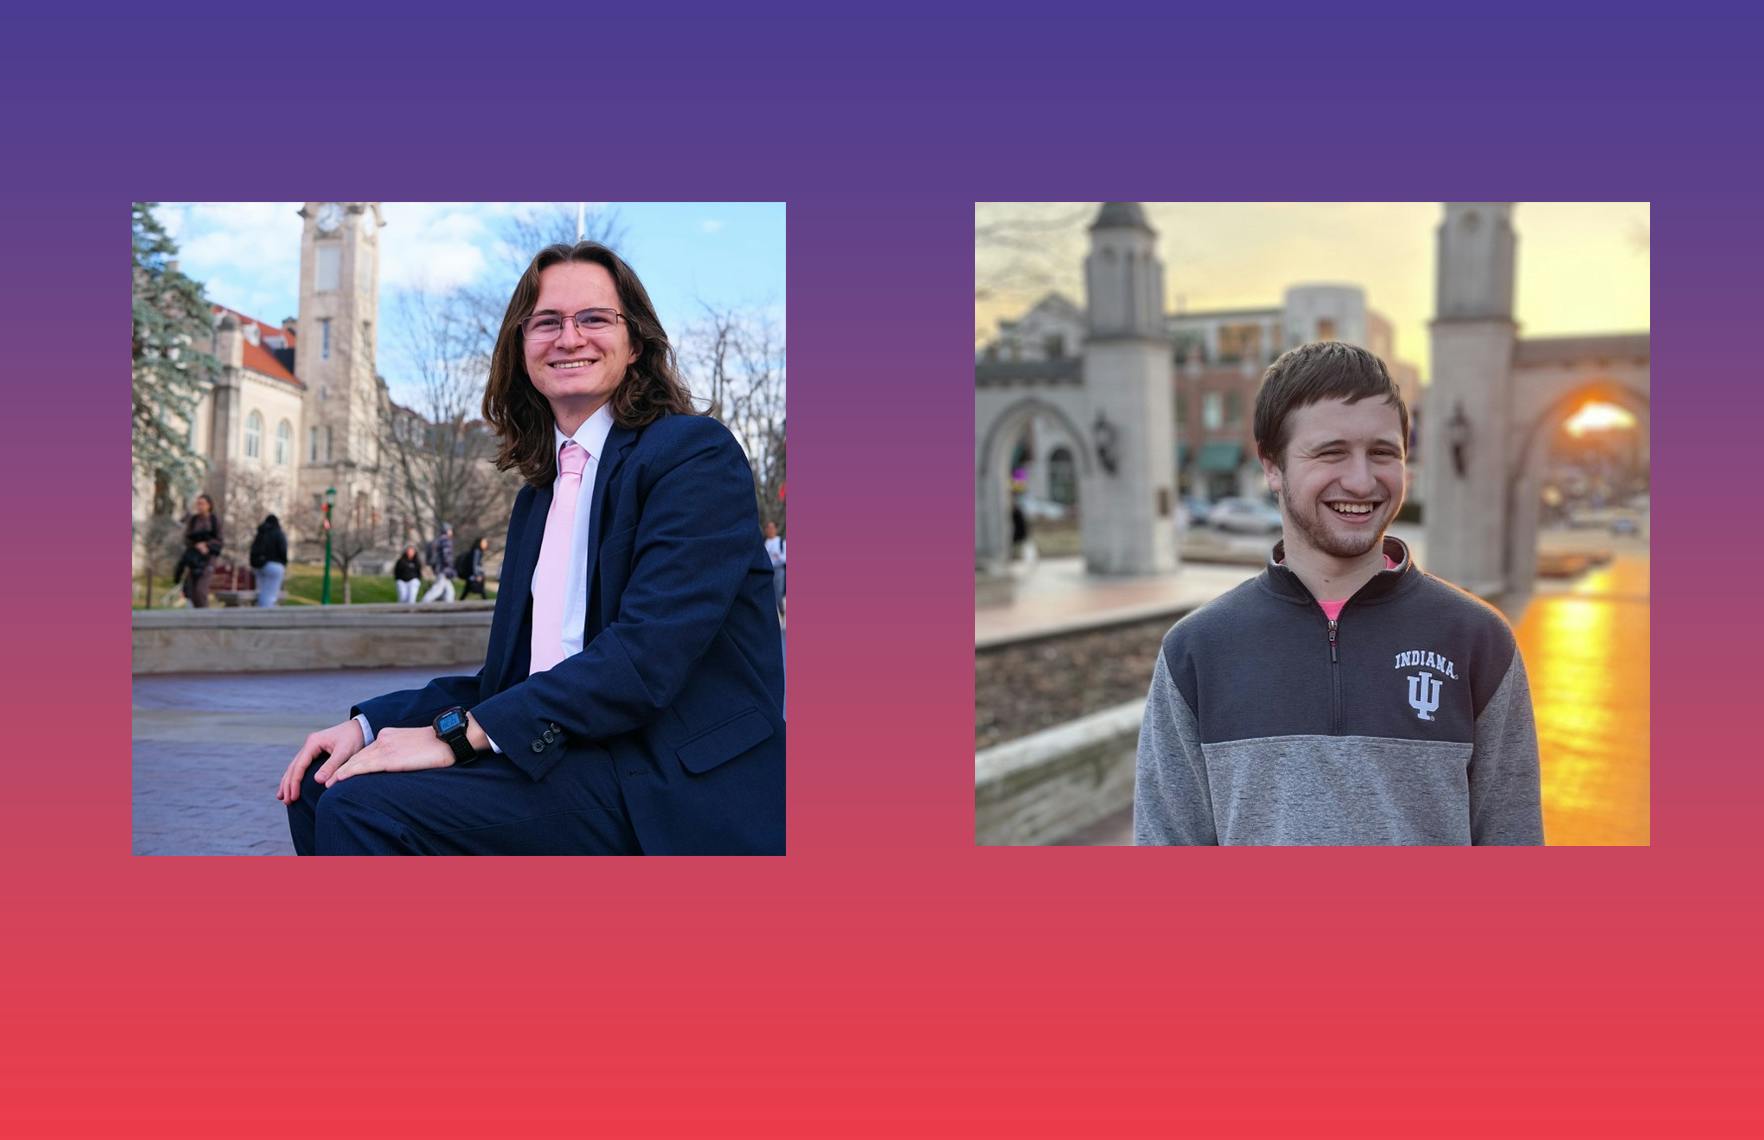 Conner Wright and David Wolfe Bender, both students at IU Bloomington,are pictured in their campaign photos